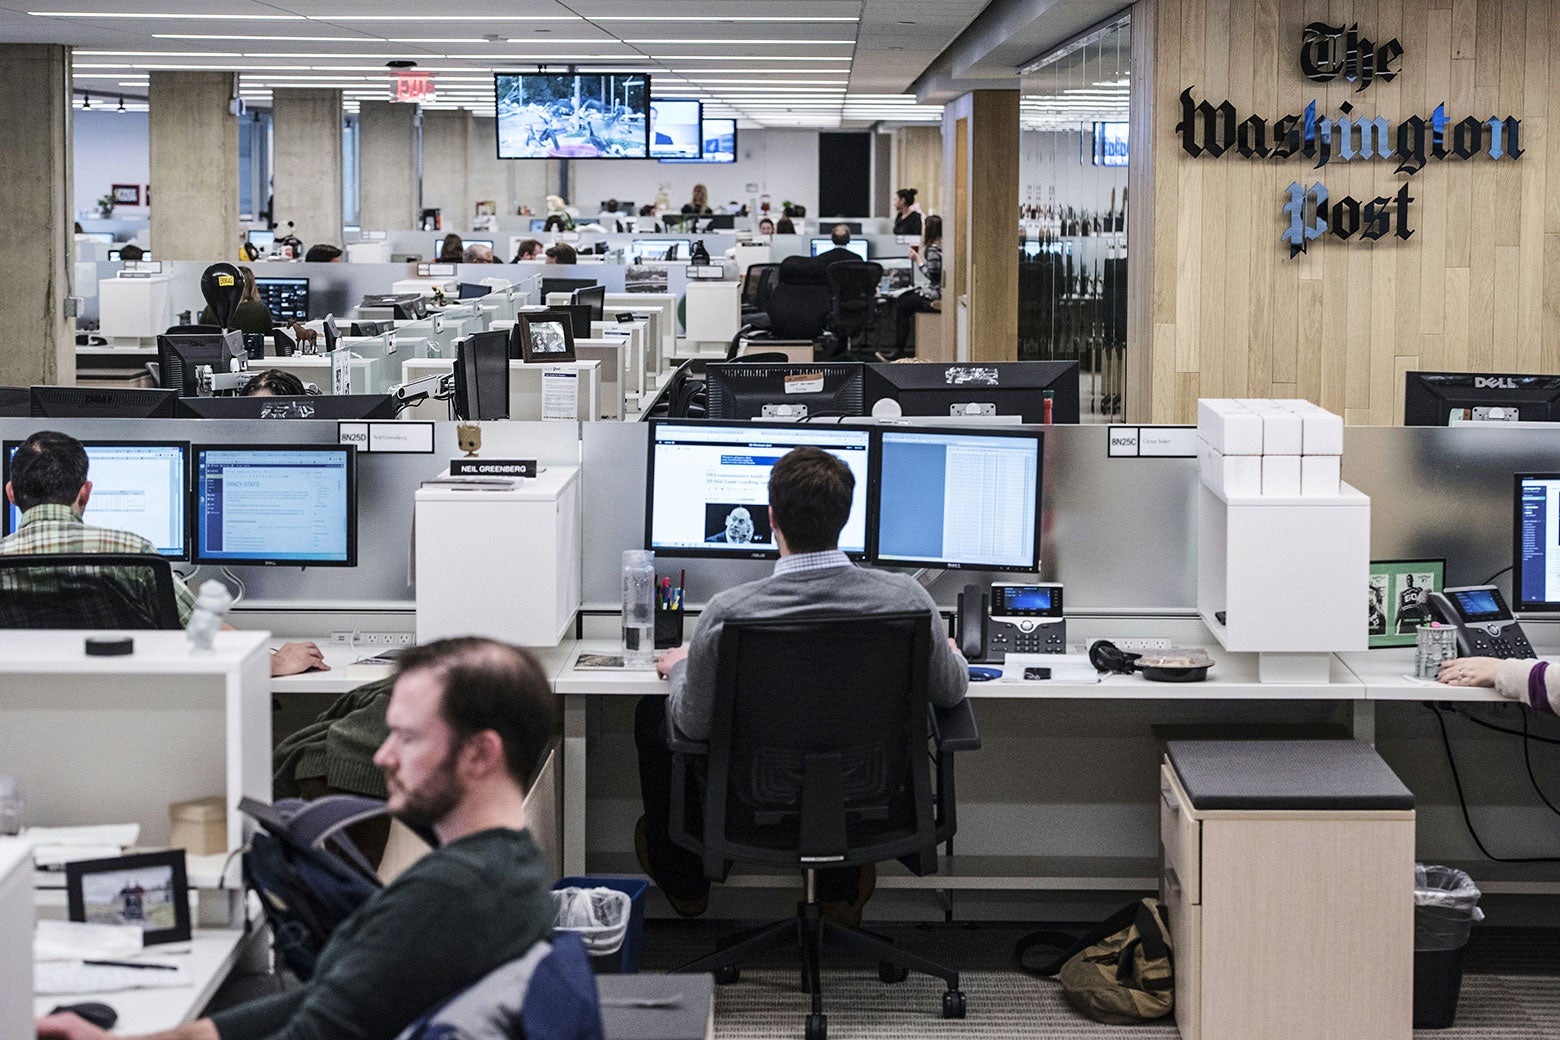 It has been a very depressing week at the Washington Post. On Sunday night, the newspaper announced that executive editor Sally Buzbee had stepped dow